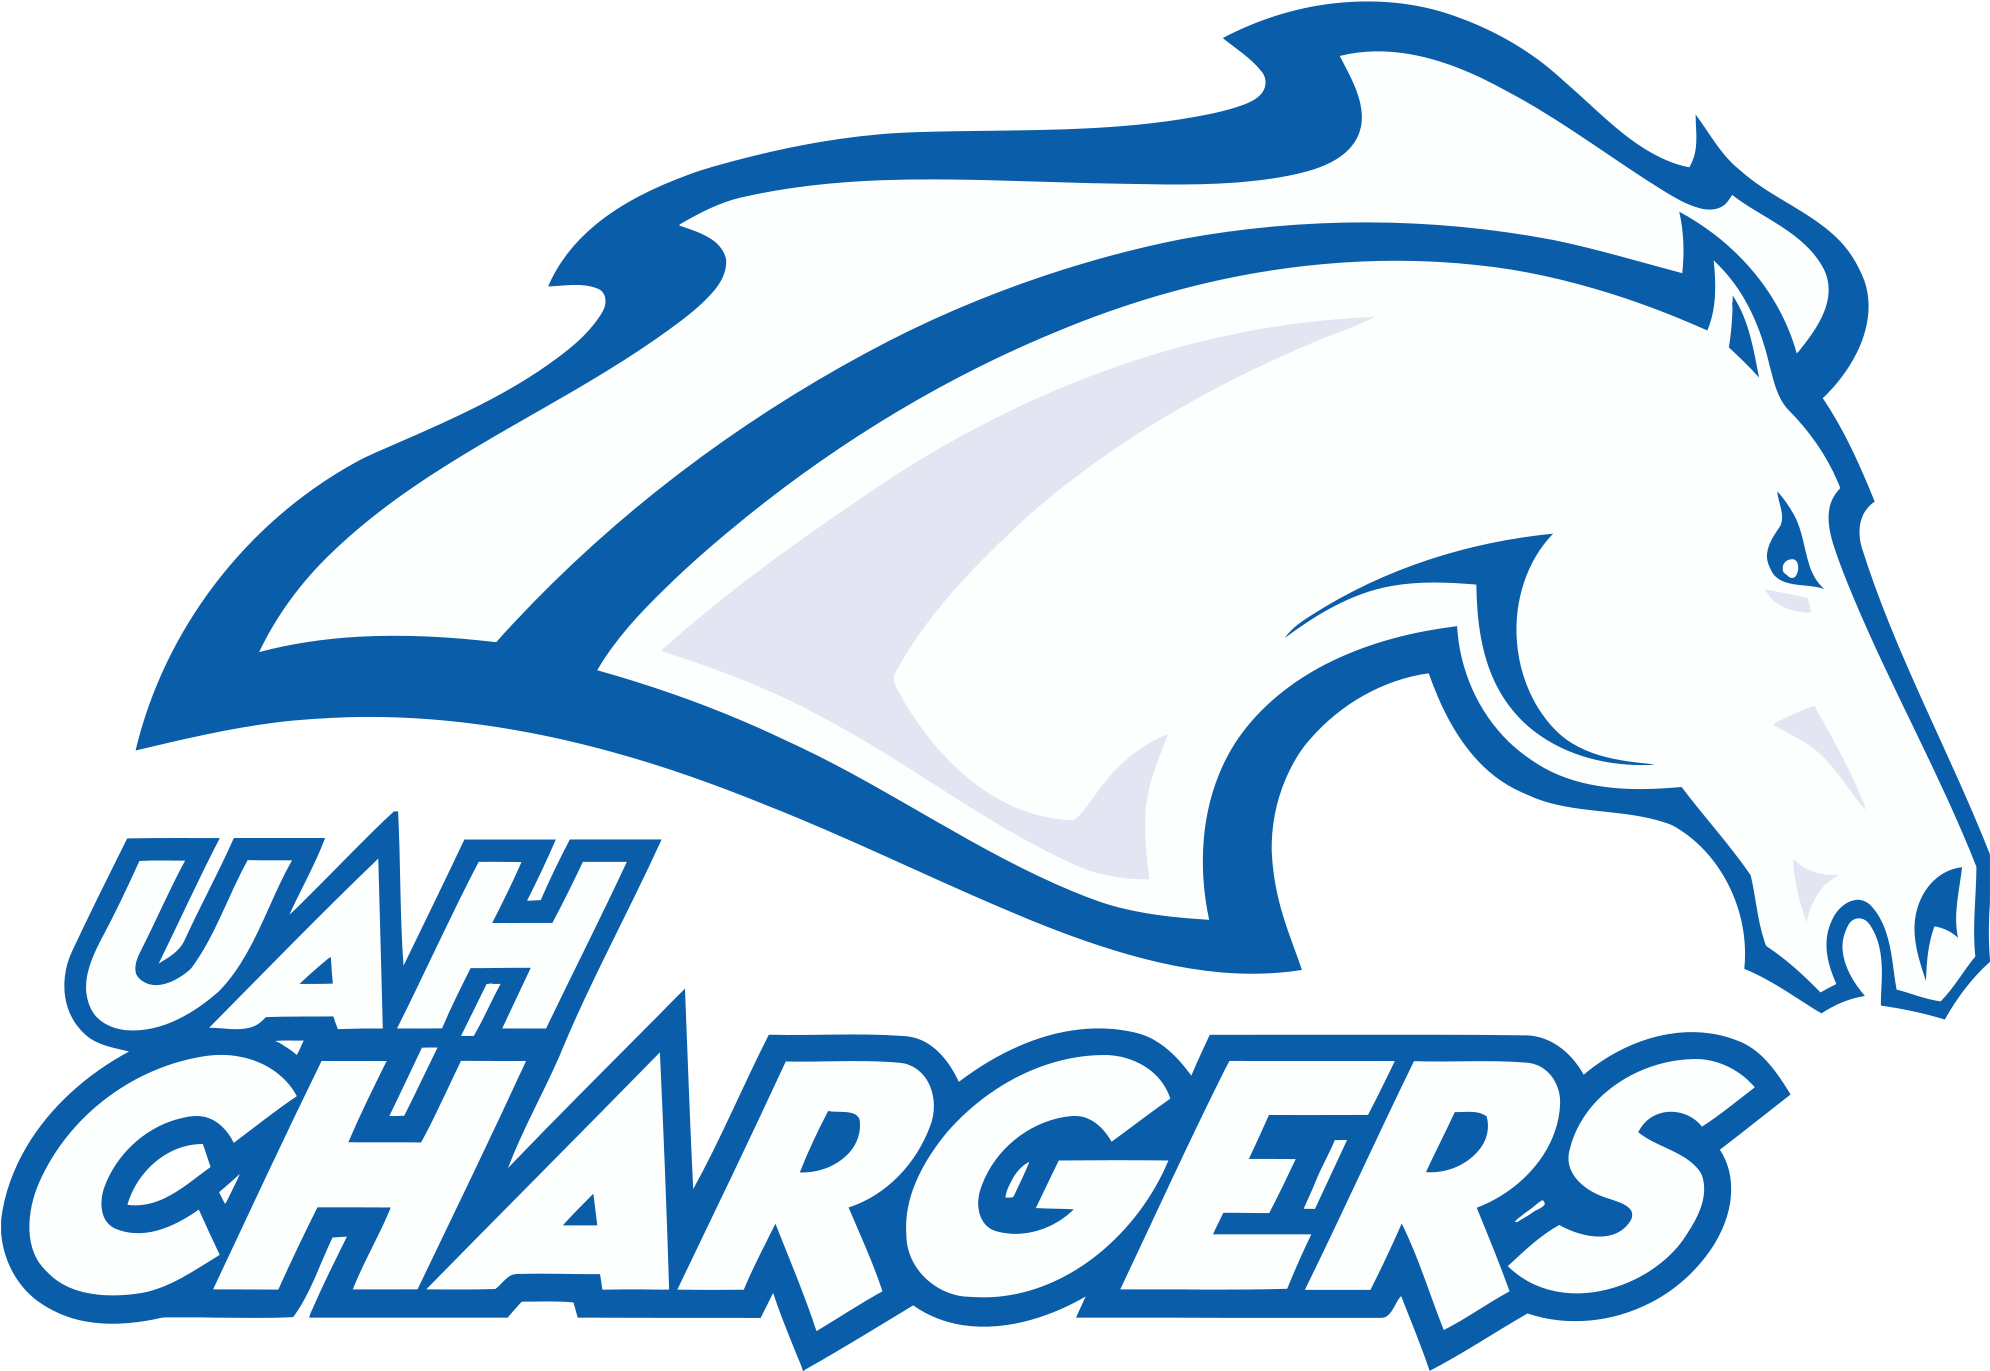 Uah Chargers Logo (2000x1385)